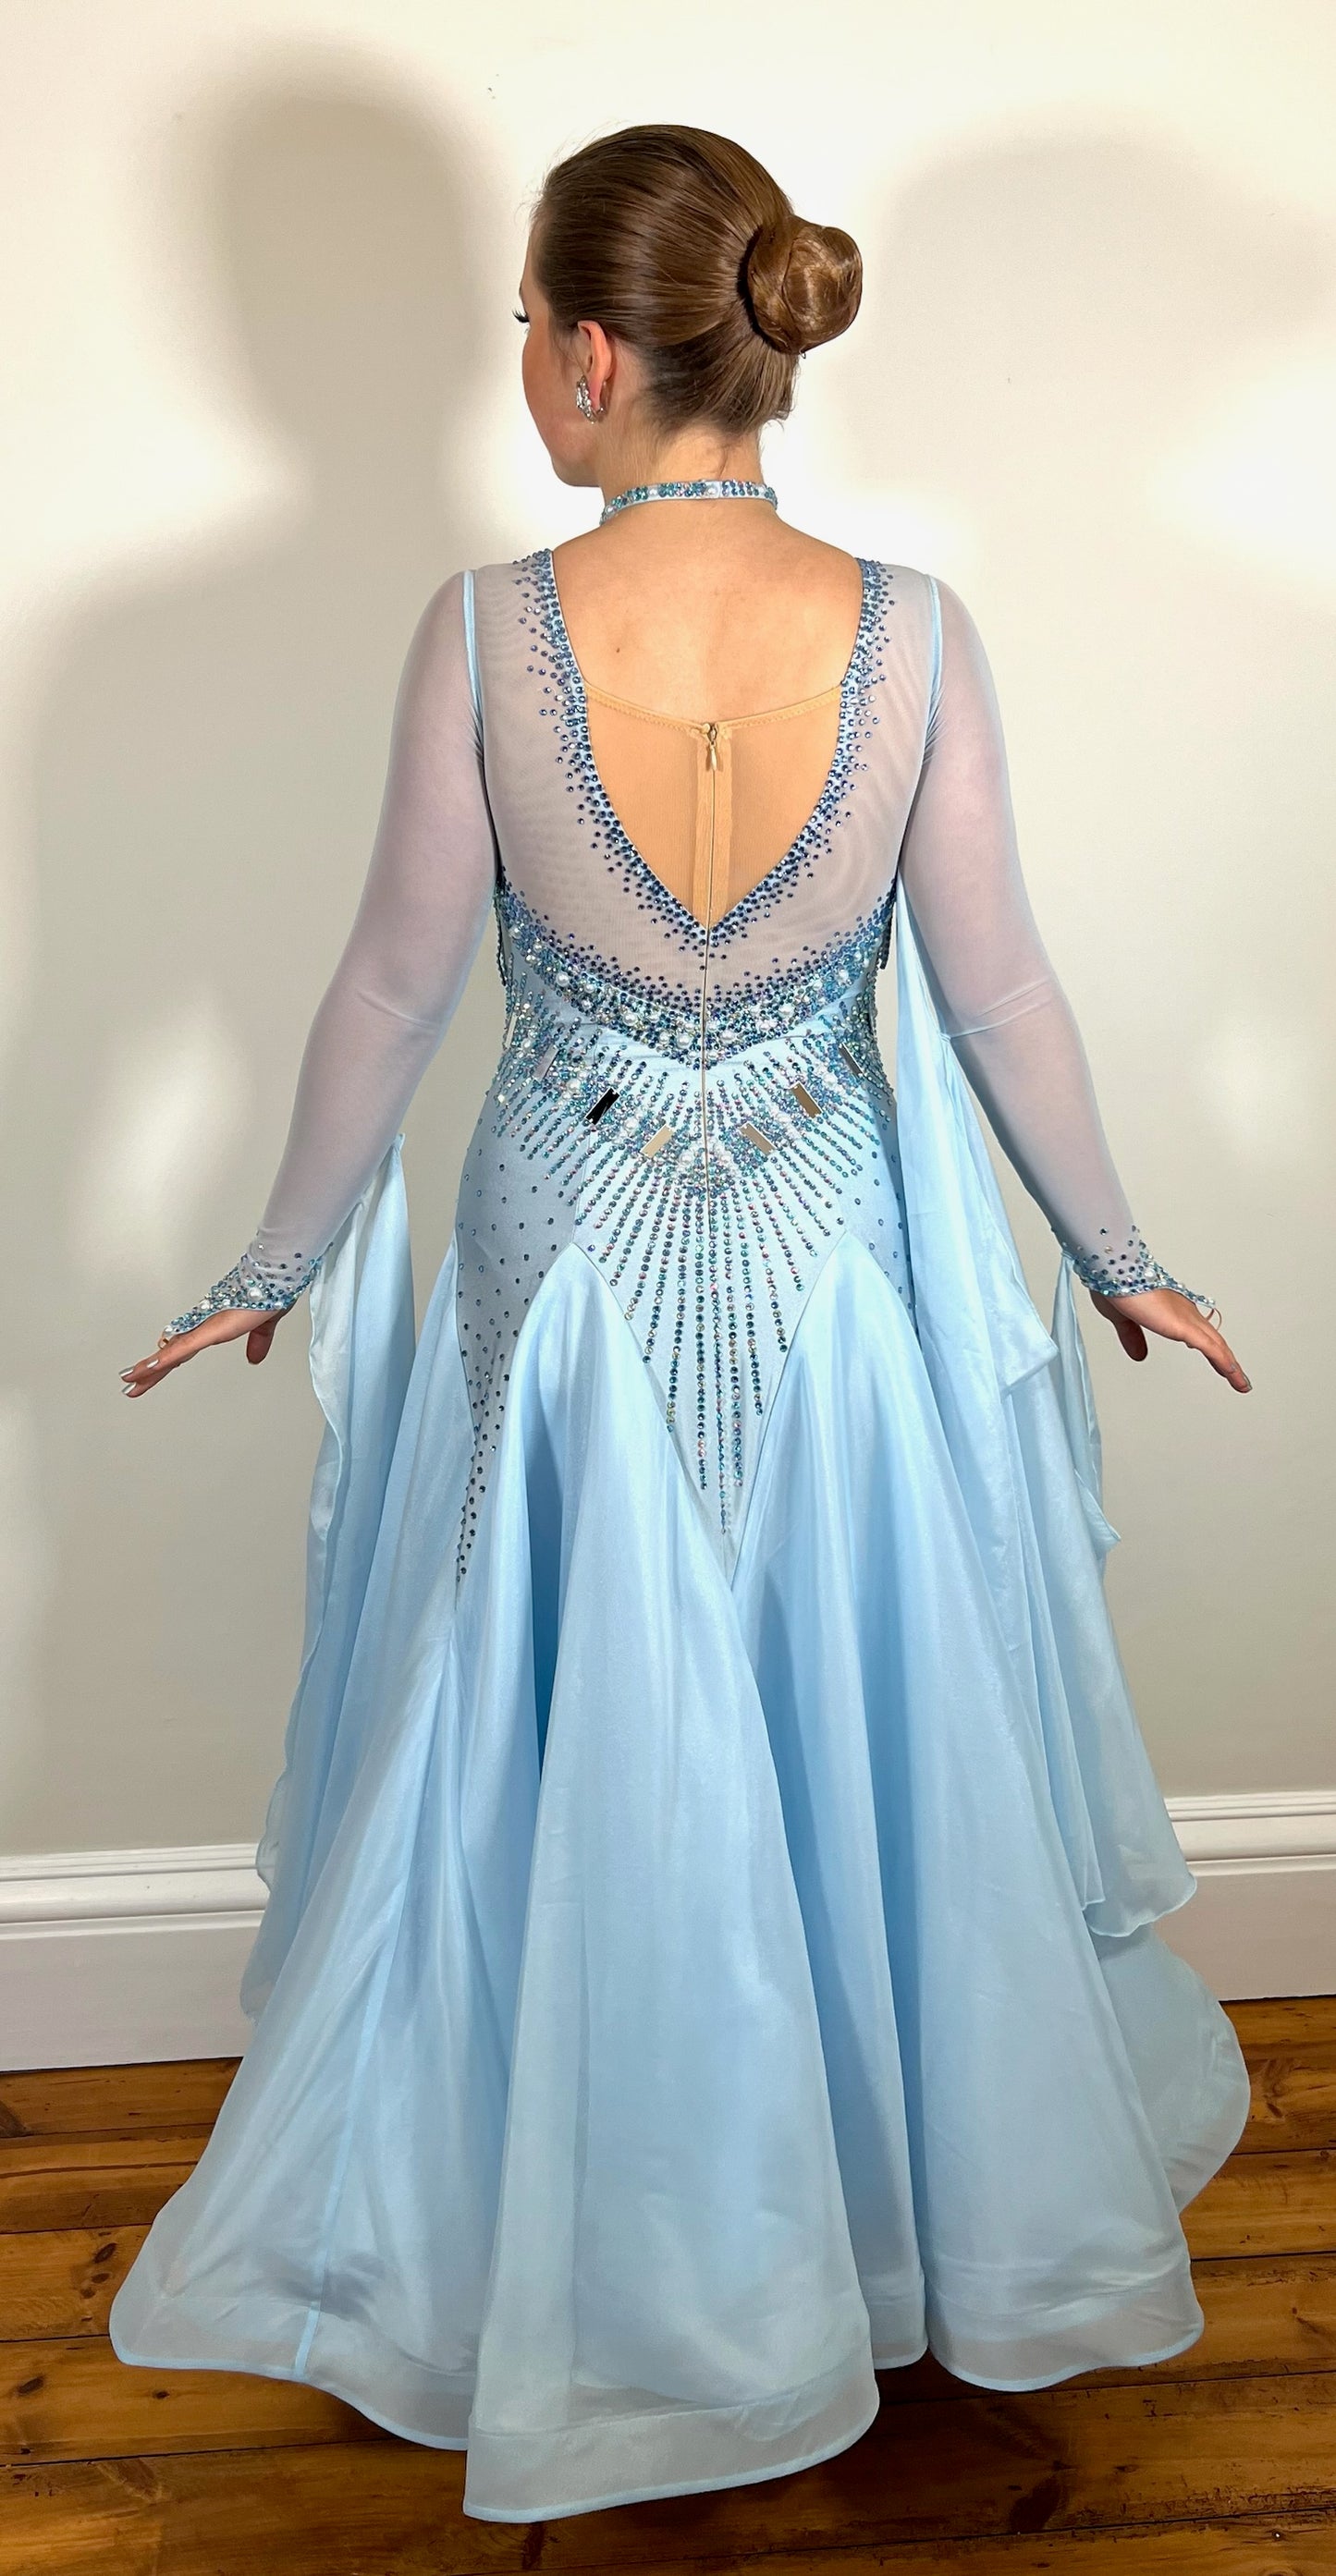 208 Baby Blue boat neck Ballroom Dress with flesh panel to the back. Stoned fringe detail to the chest area. Stoned waist detail to the front & back. Boat neck with flesh panel to the back. Decorated with AB, light sapphire & sapphire stones